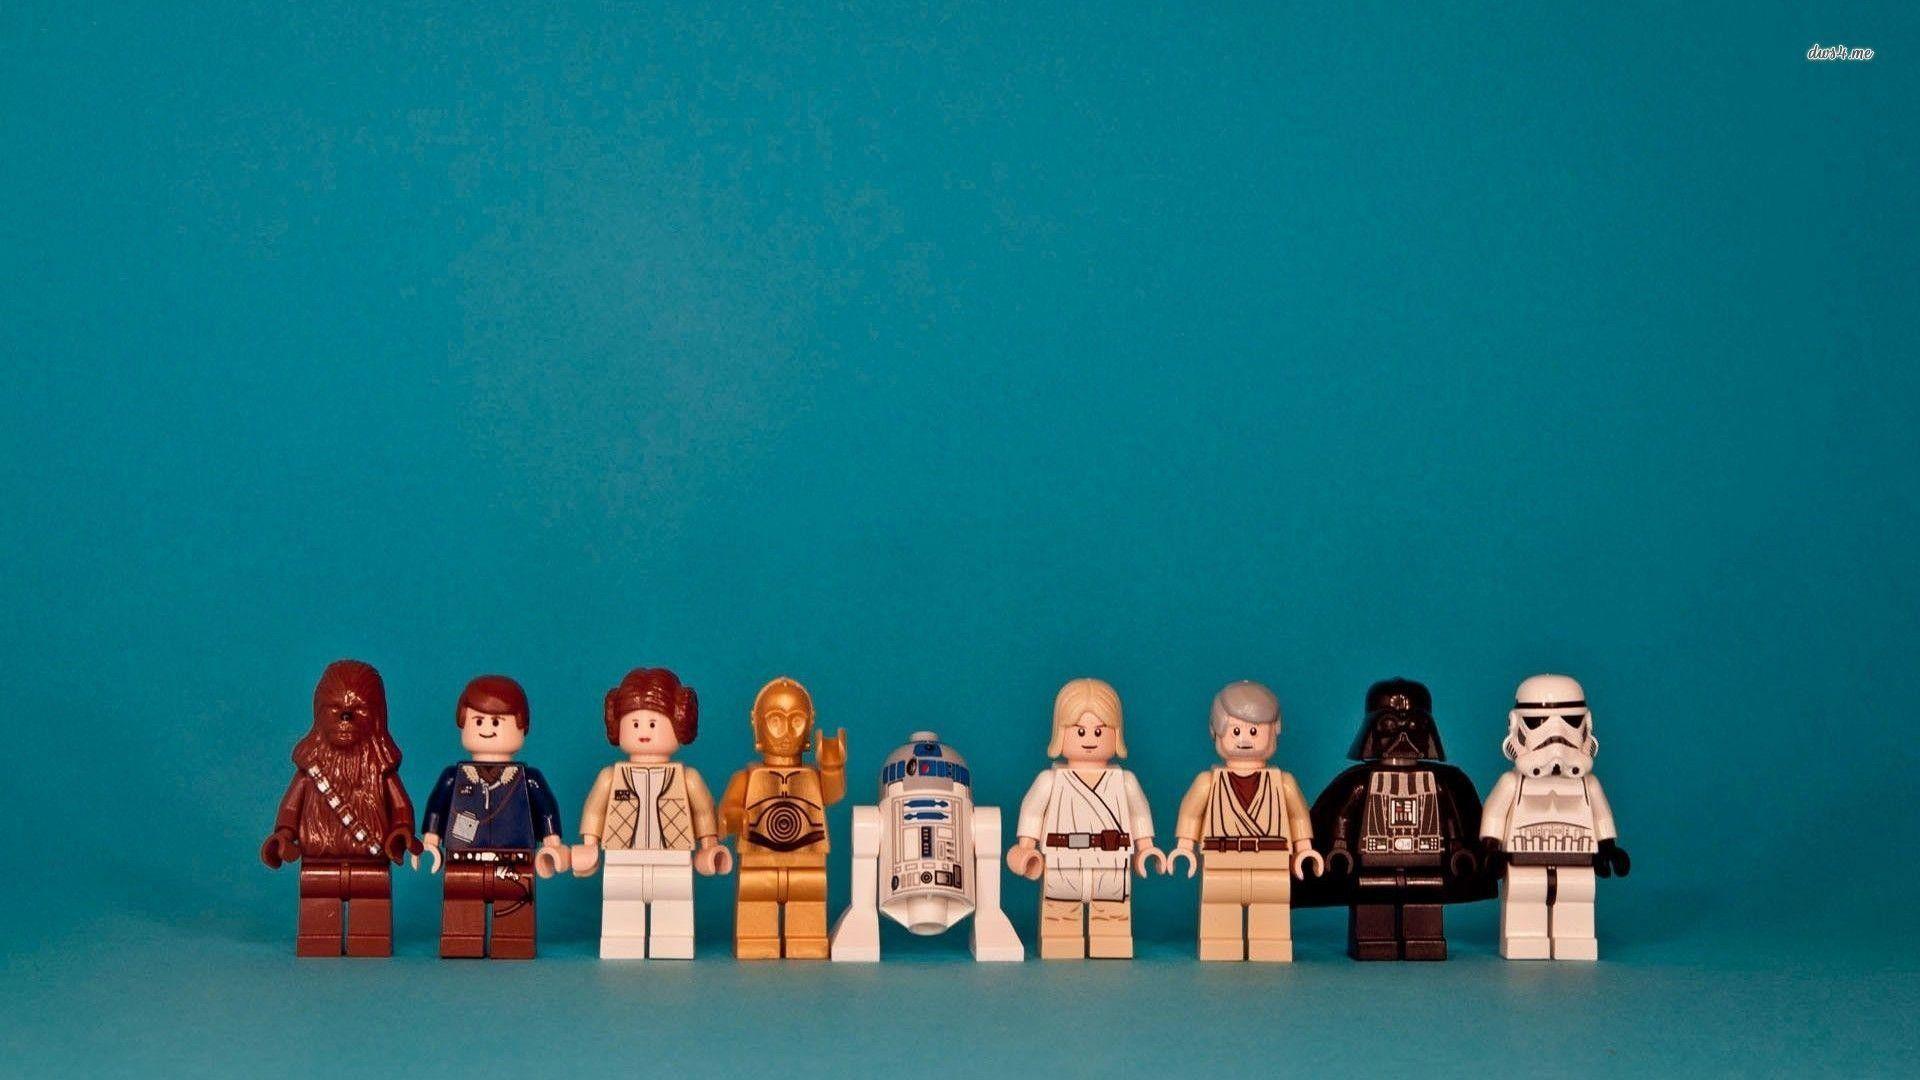 Star Wars Characters Lego Background HD Wallpaper of Lego. Star wars wallpaper, Star wars background, Star wars characters